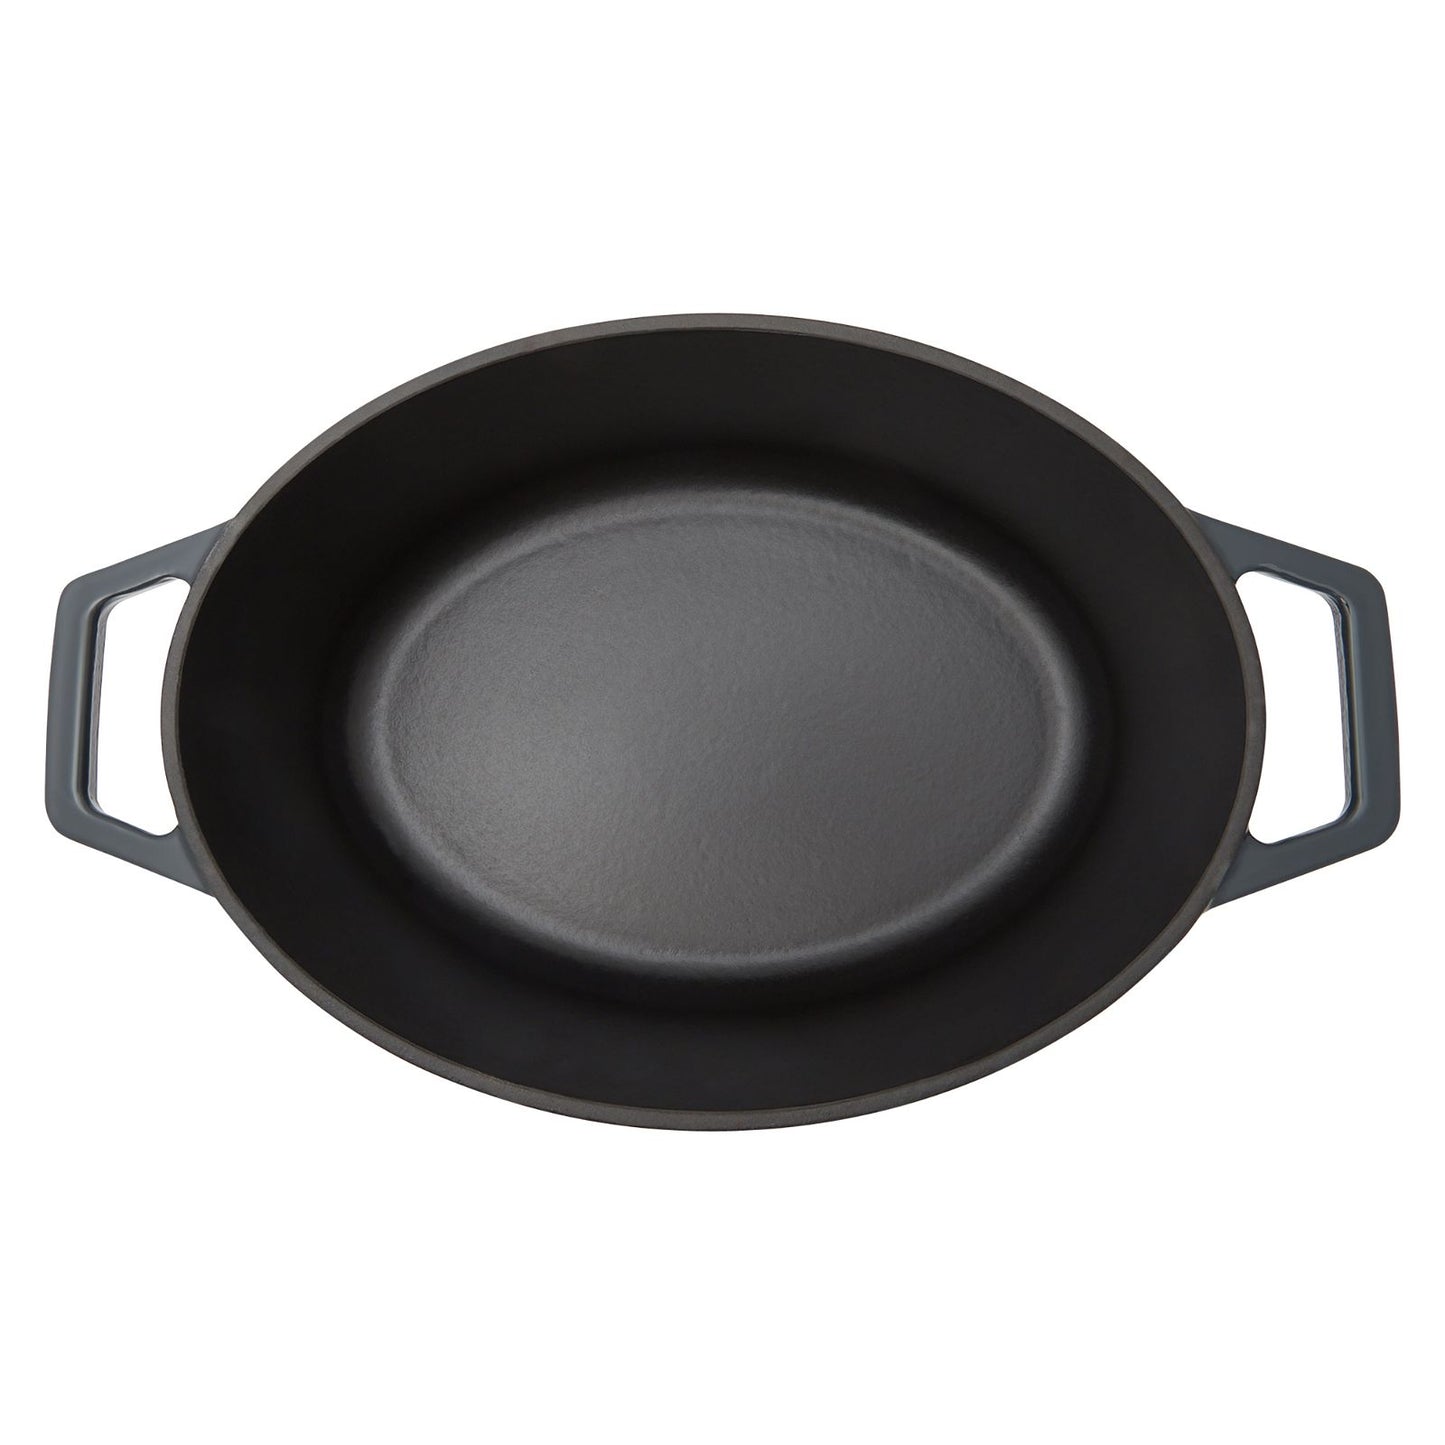 Westinghouse Cast Iron Pot 30cm Oval Grey-#product_category#- Distributed by:  under license